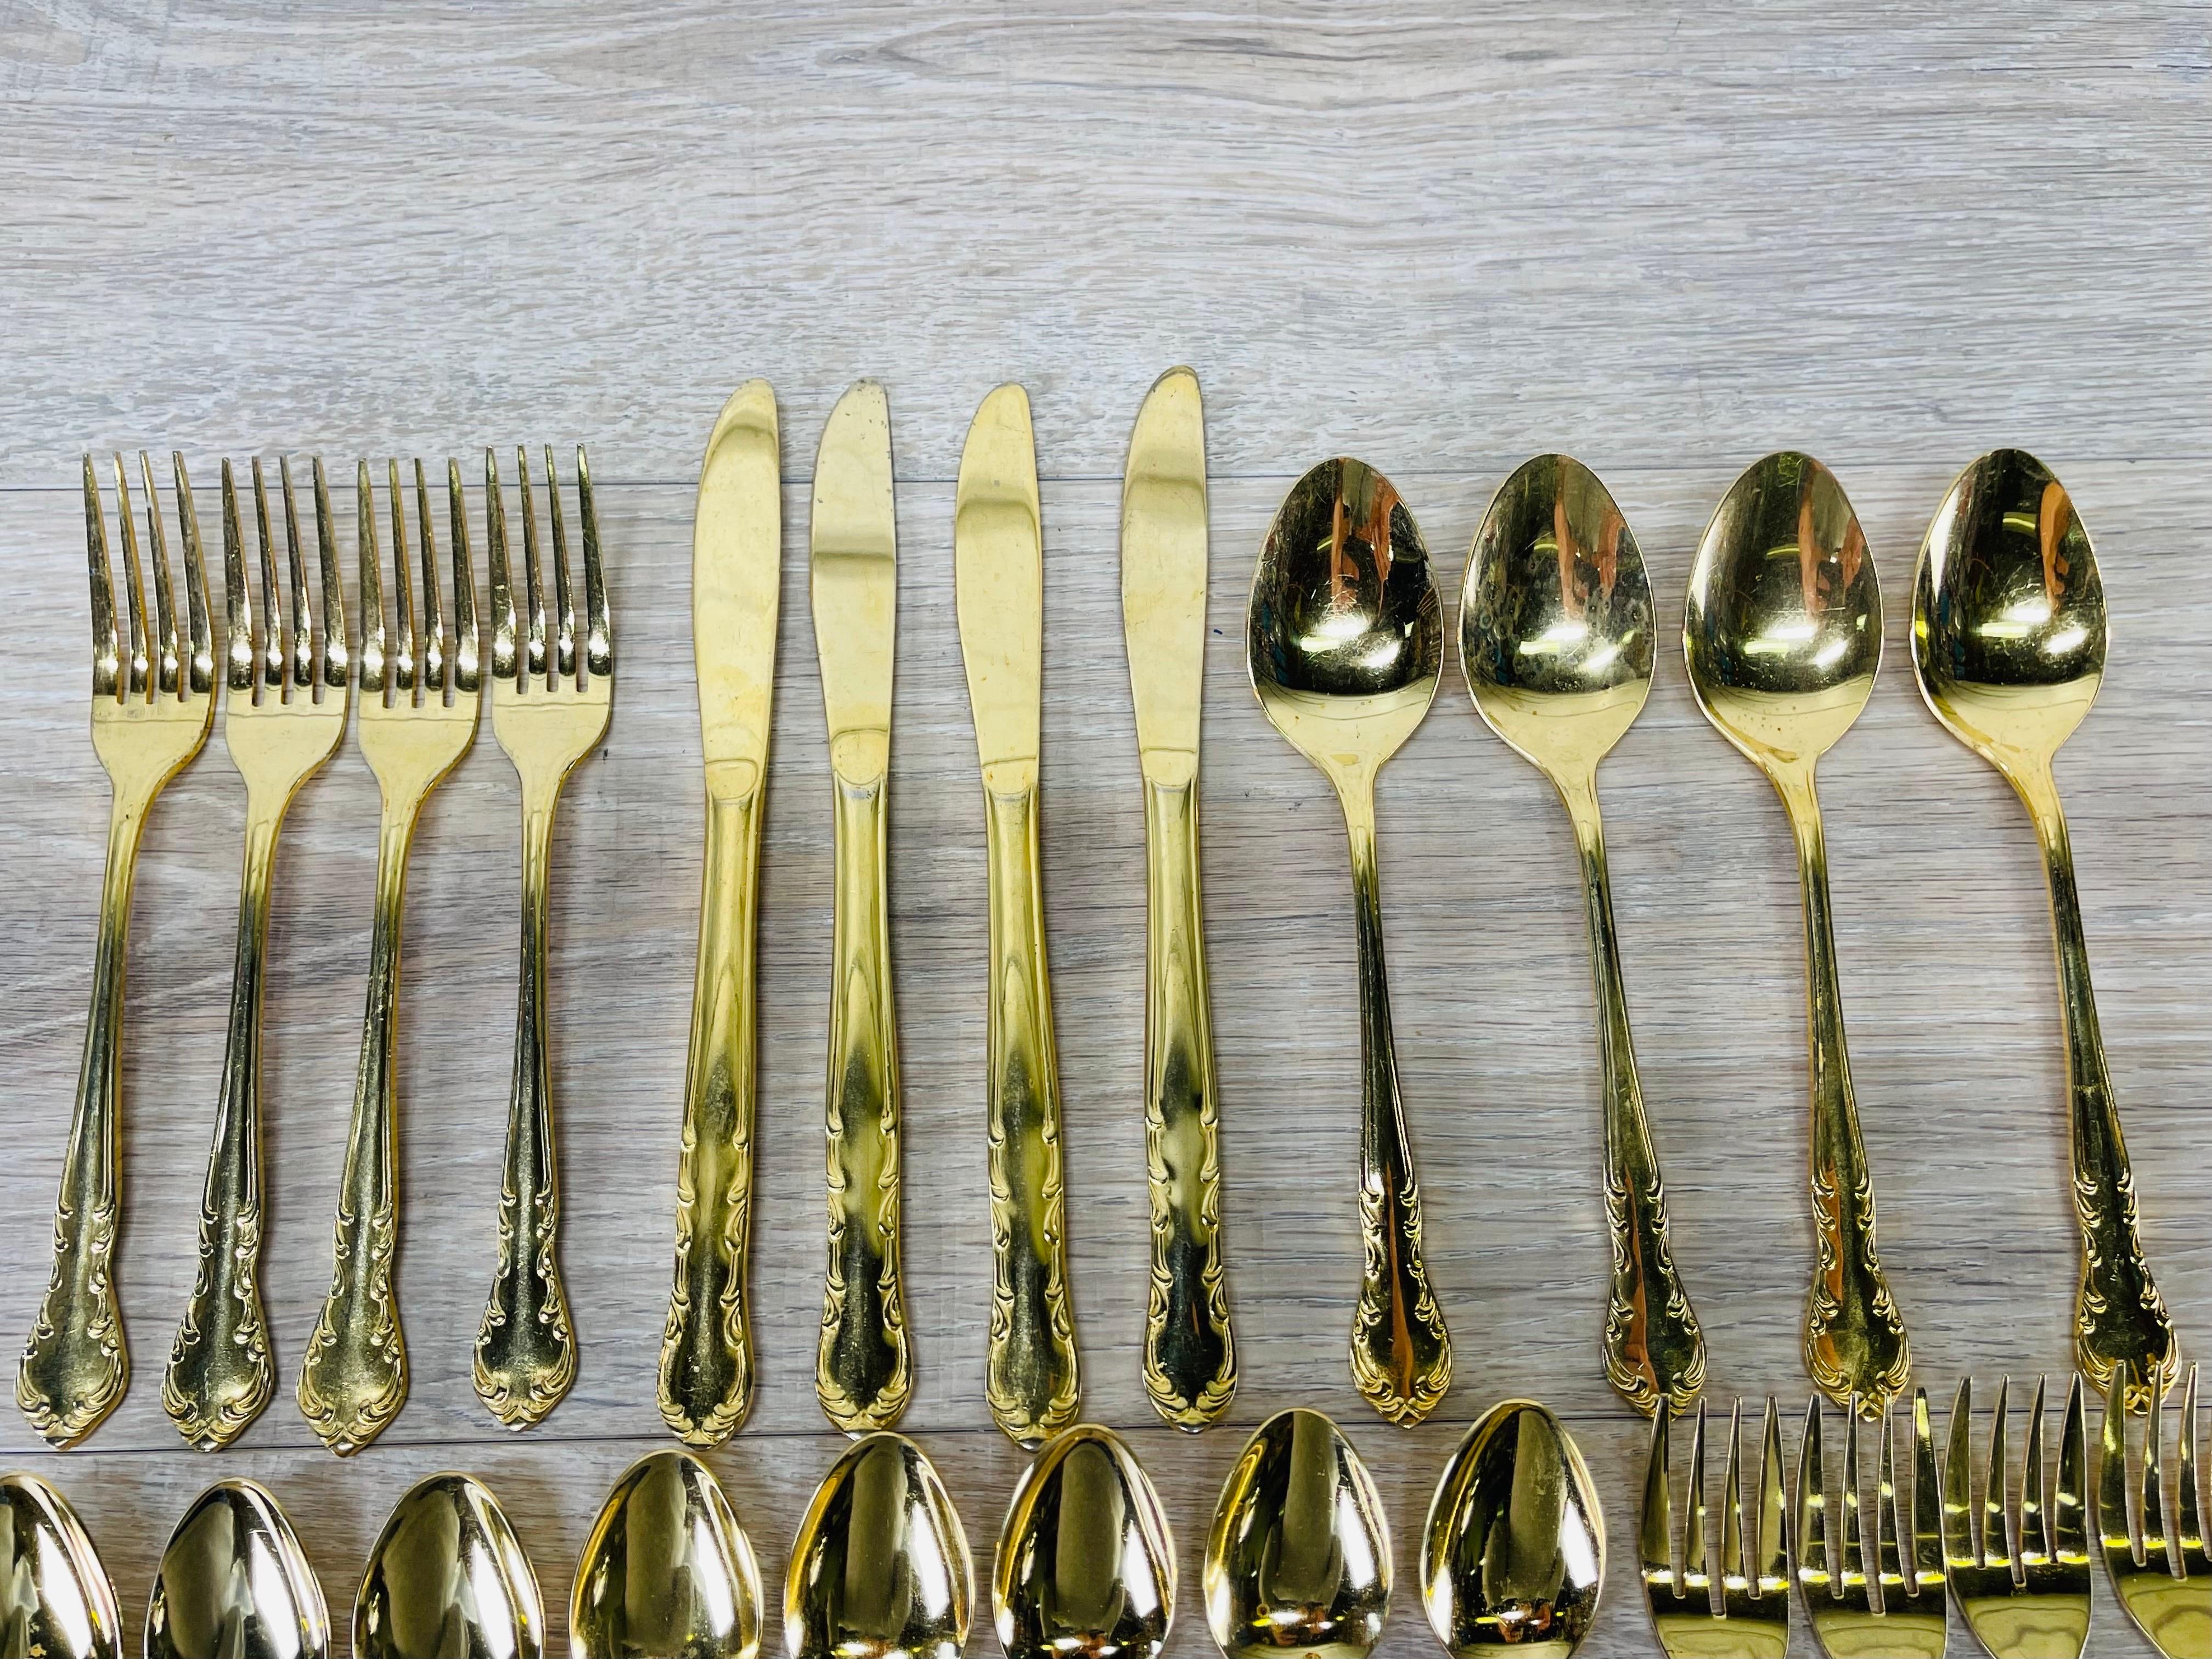 Vintage set of 24 pieces of flatware with a scroll design. This is a complete set of four with additional pieces. There are 4 knives, 4 dinner forks, 4 salad forks, 4 tablespoons and 8 teaspoons. No marks. Light wear to the gold tone in spots from